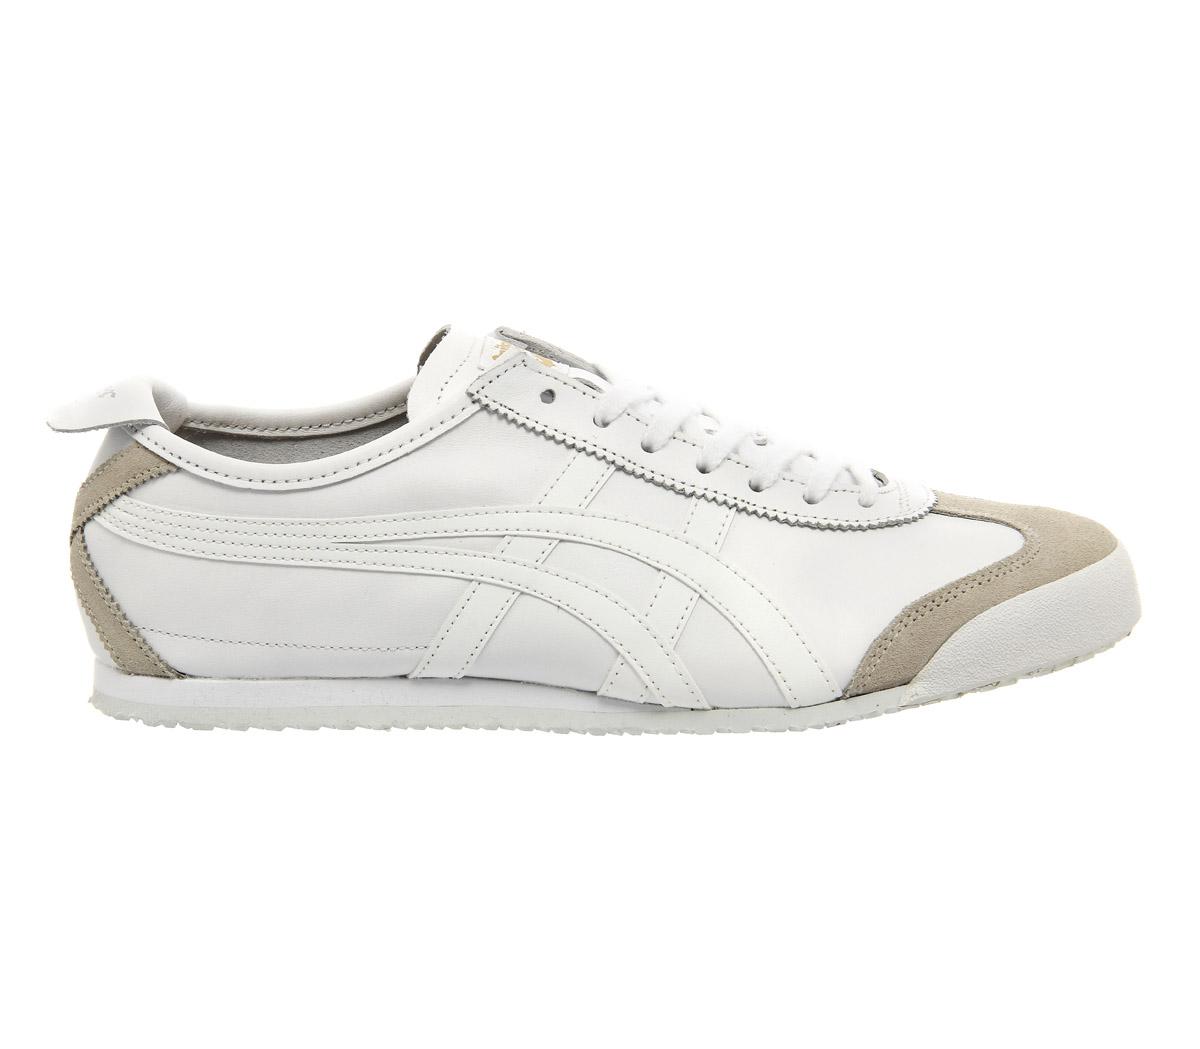 Onitsuka Tiger Mexico 66 in White - Lyst